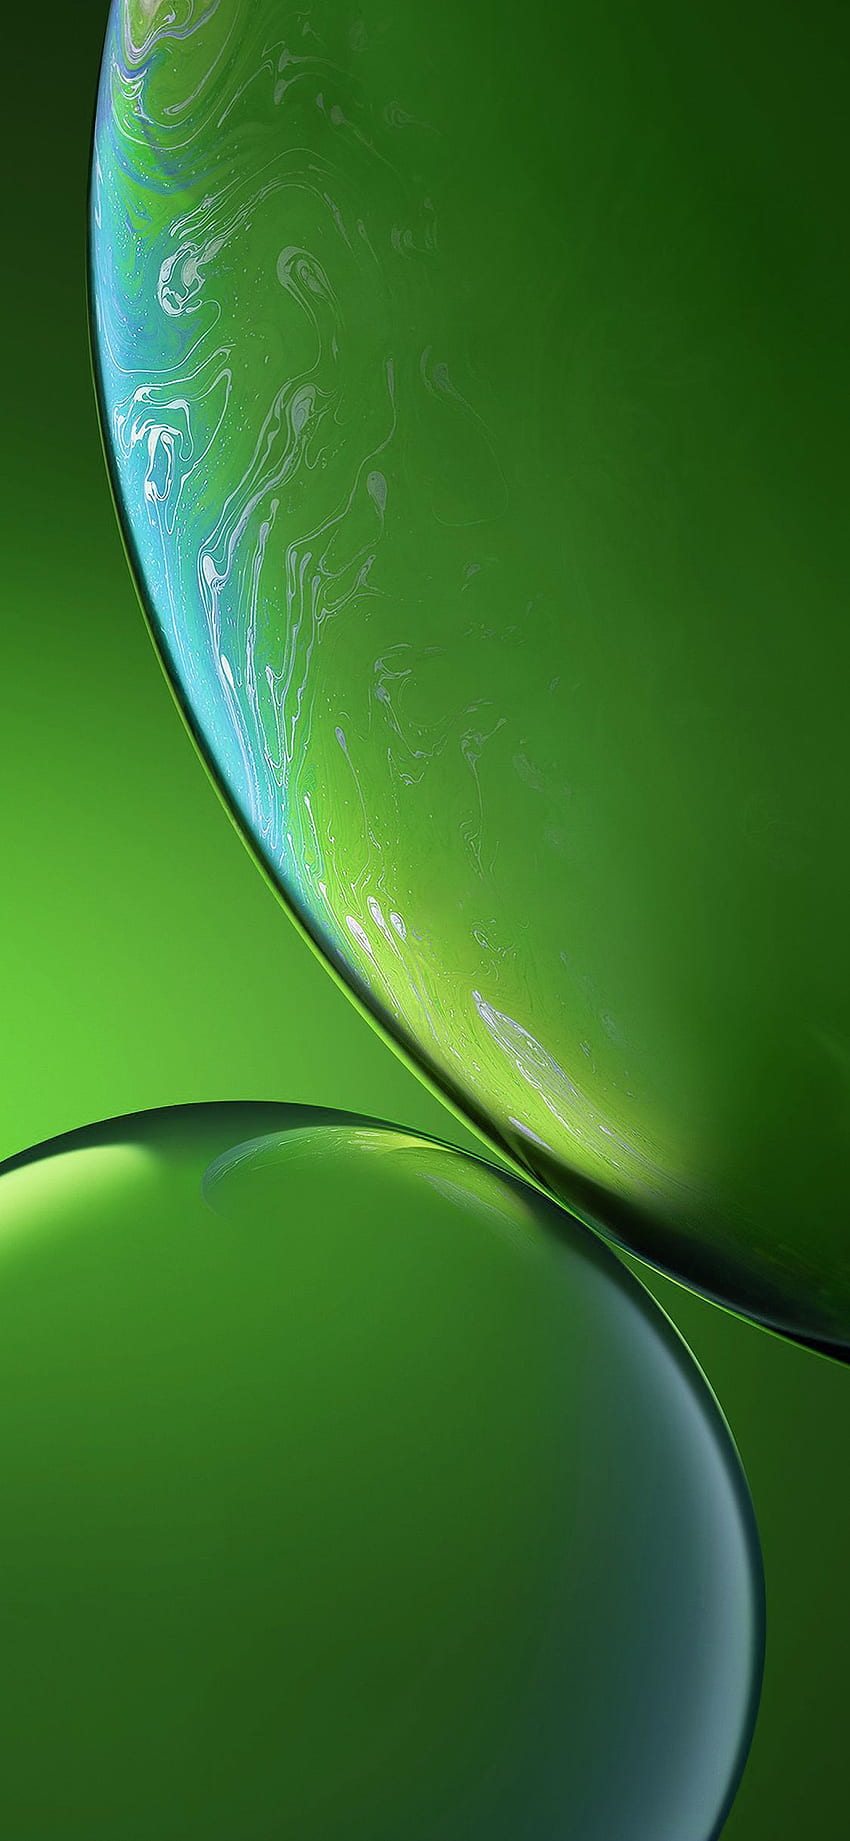 iPhone XR - Bonus - The Missing Color (Green) - Central. Green , iPhone , Apple iphone, Super Light Green HD phone wallpaper